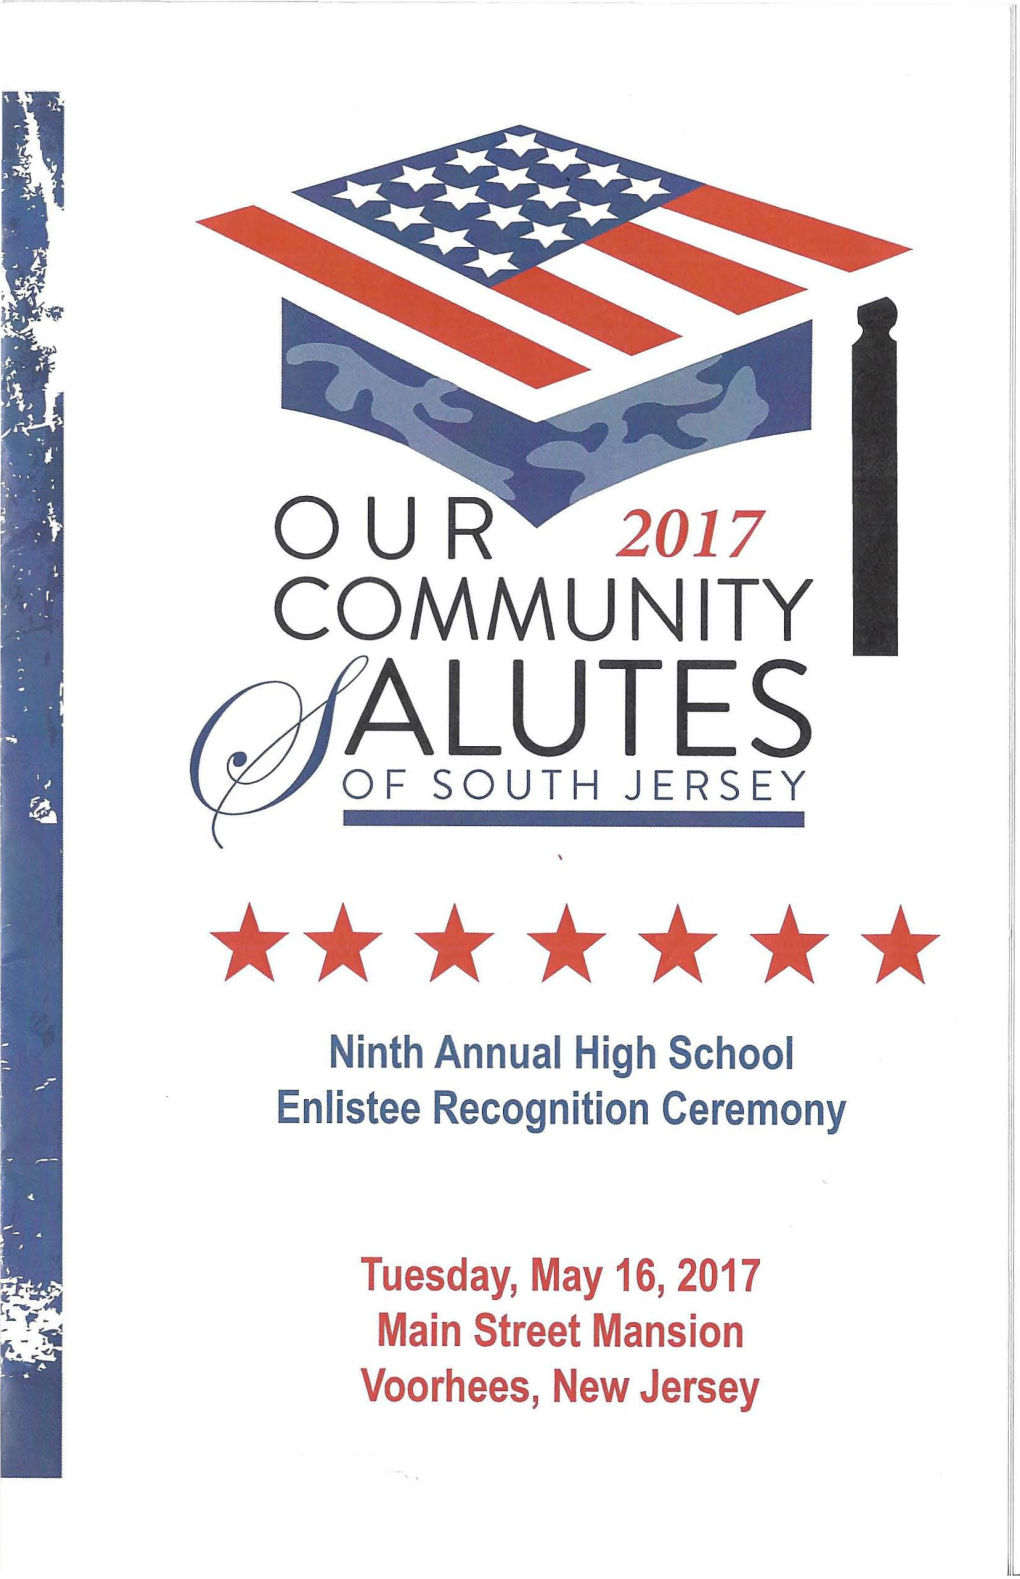 J\LUTES of SOUTH JERSEY ******* Ninth Annual High School Enlistee Recognition Ceremony